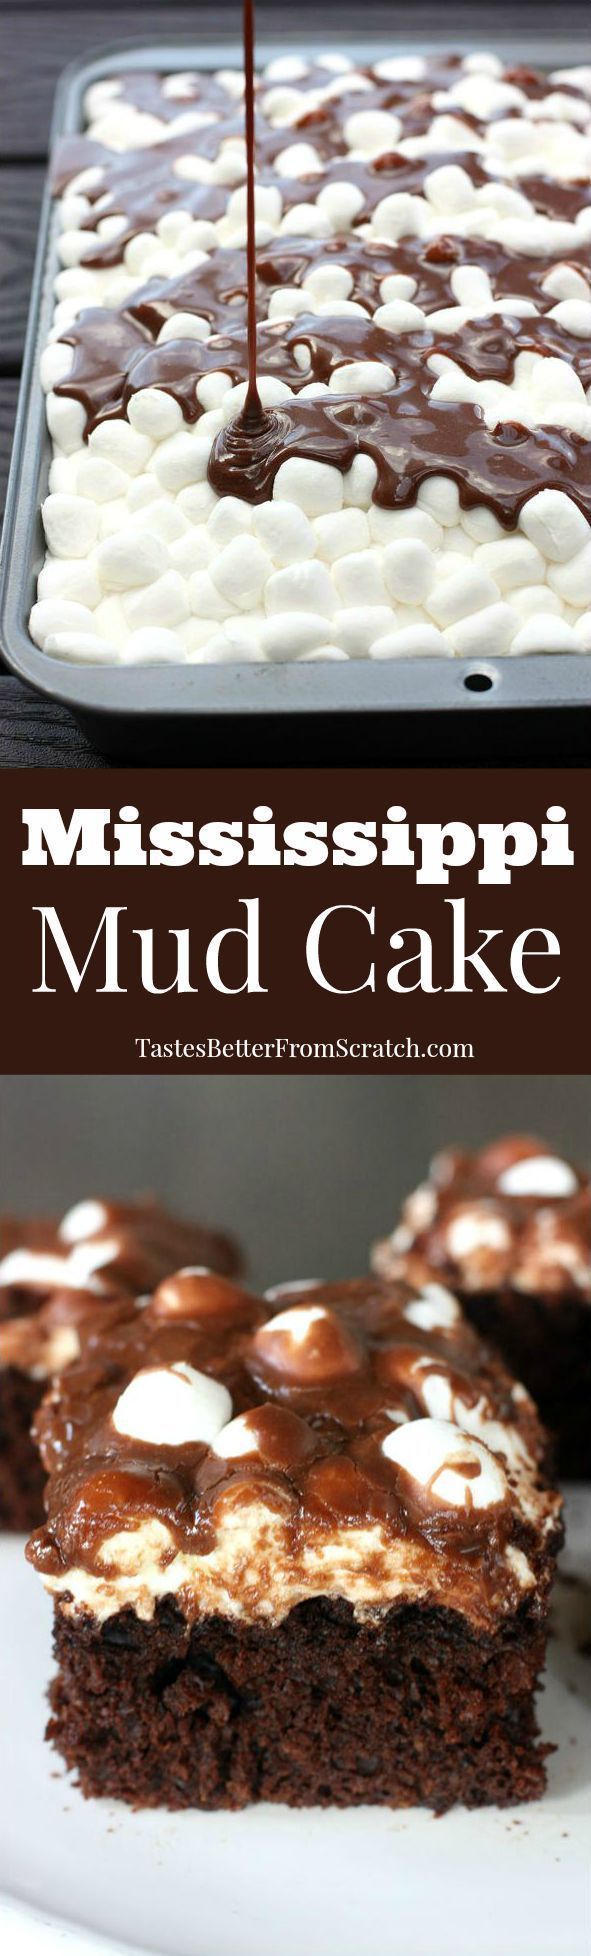 Mississippi Mud Cake–homemade chocolate cake with marshmallows and warm chocolate frosting poured on top! BEST CAKE EVER!